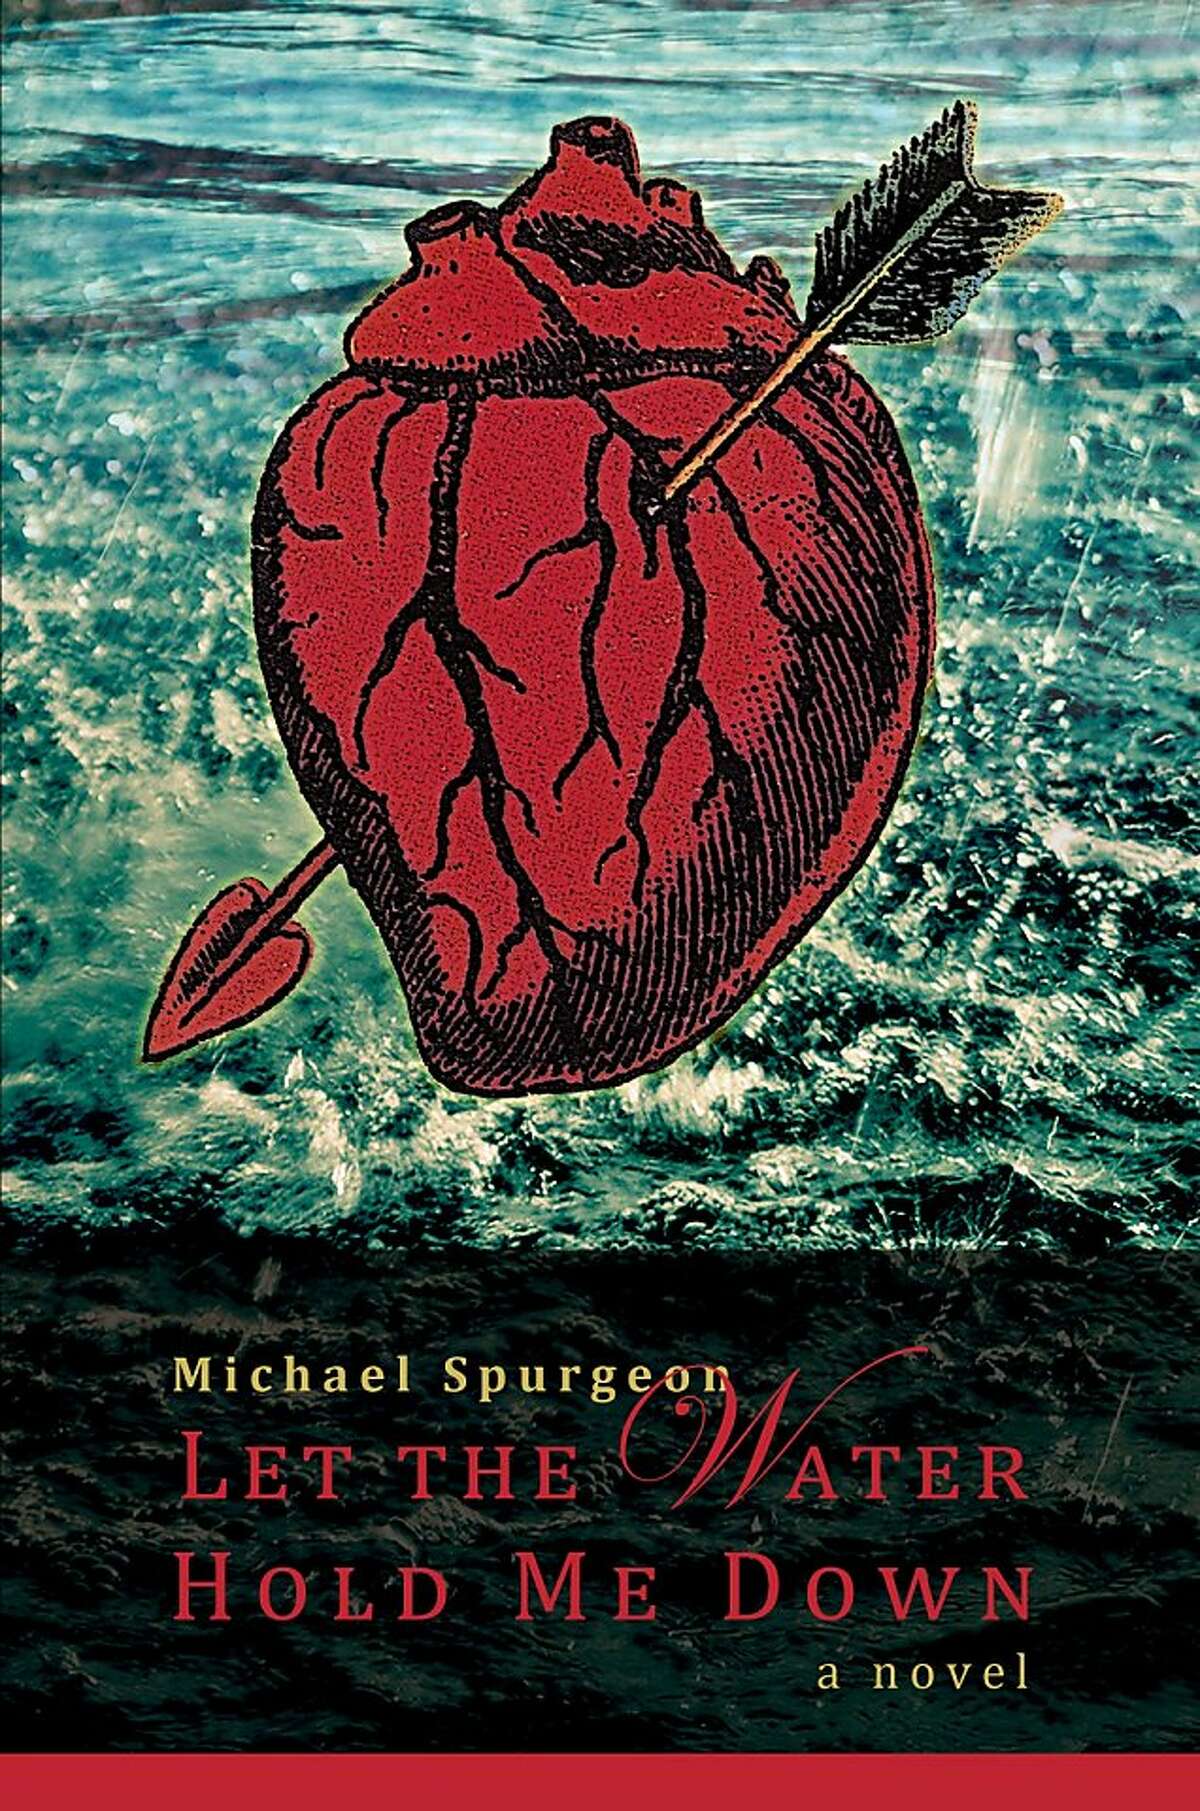 Let the Water Hold Me Down, by Michael Spurgeon